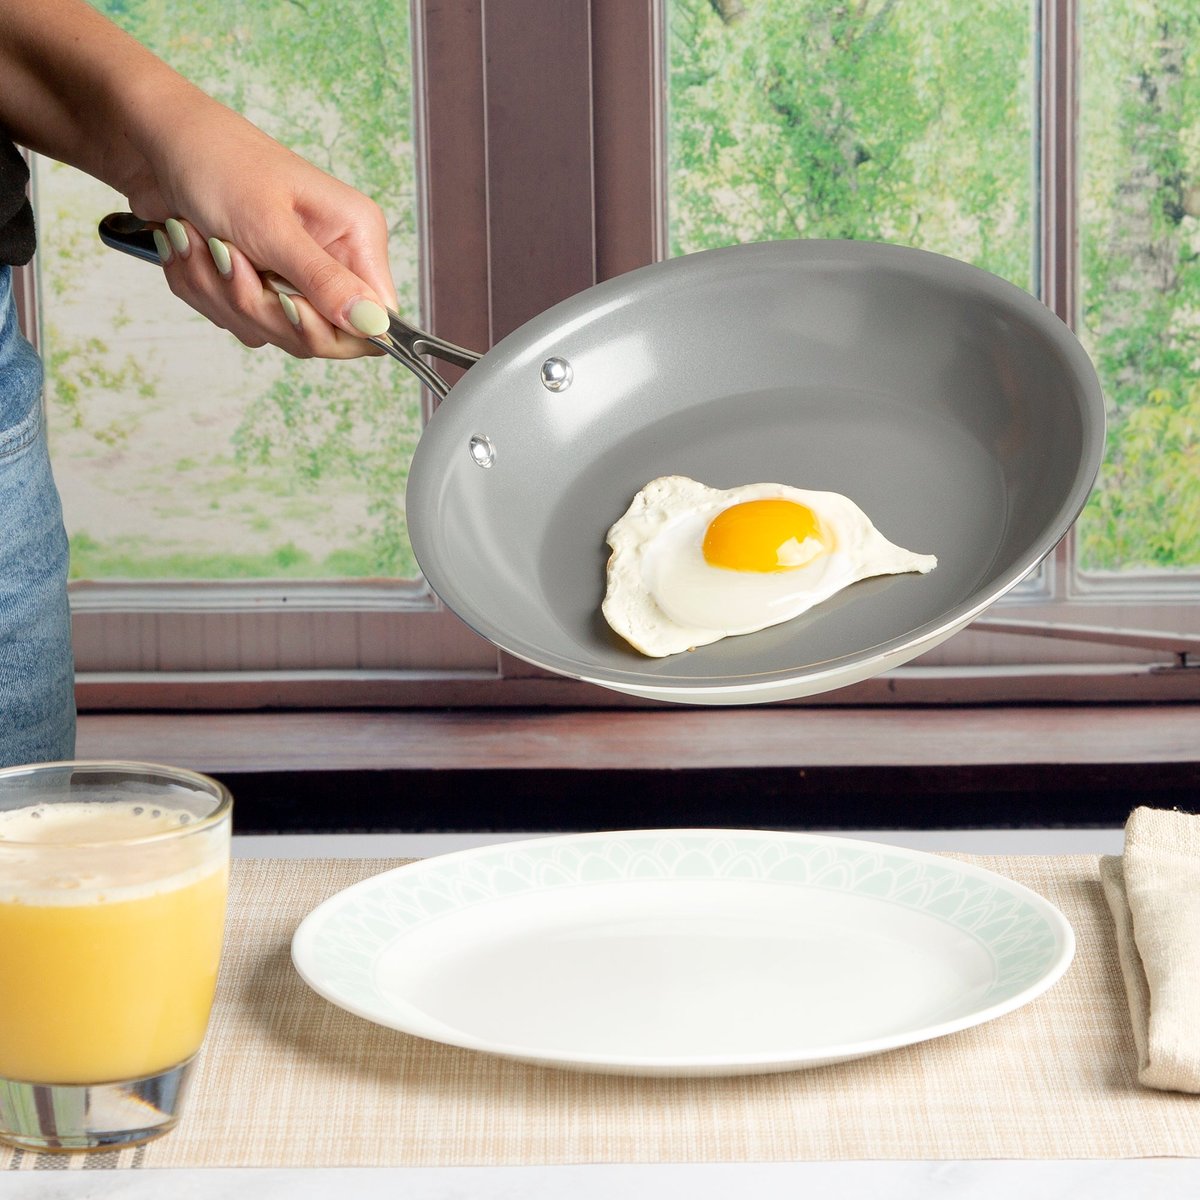 https://images.verishop.com/goodful-kitchen-goodful-11-inch-ceramic-nonstick-frying-pan-dishwasher-safe-skillet-with-comfort-grip-stainless-steel-handle-pfoa-free-cream/M00741393480047-3071561171?auto=format&cs=strip&fit=max&w=1200